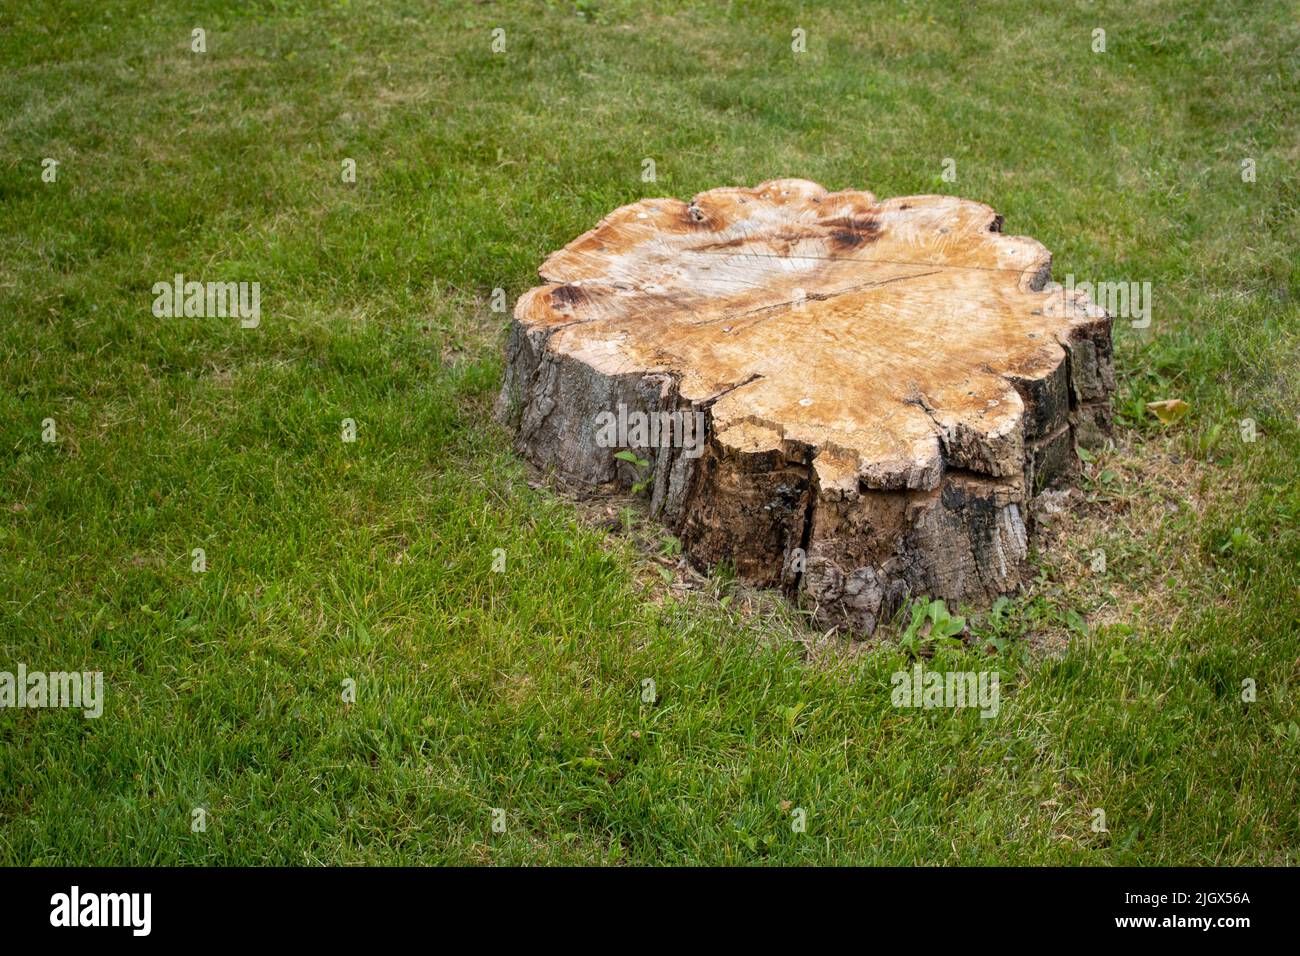 Tree stump of a large chainsaw cut tree on the grass Stock Photo